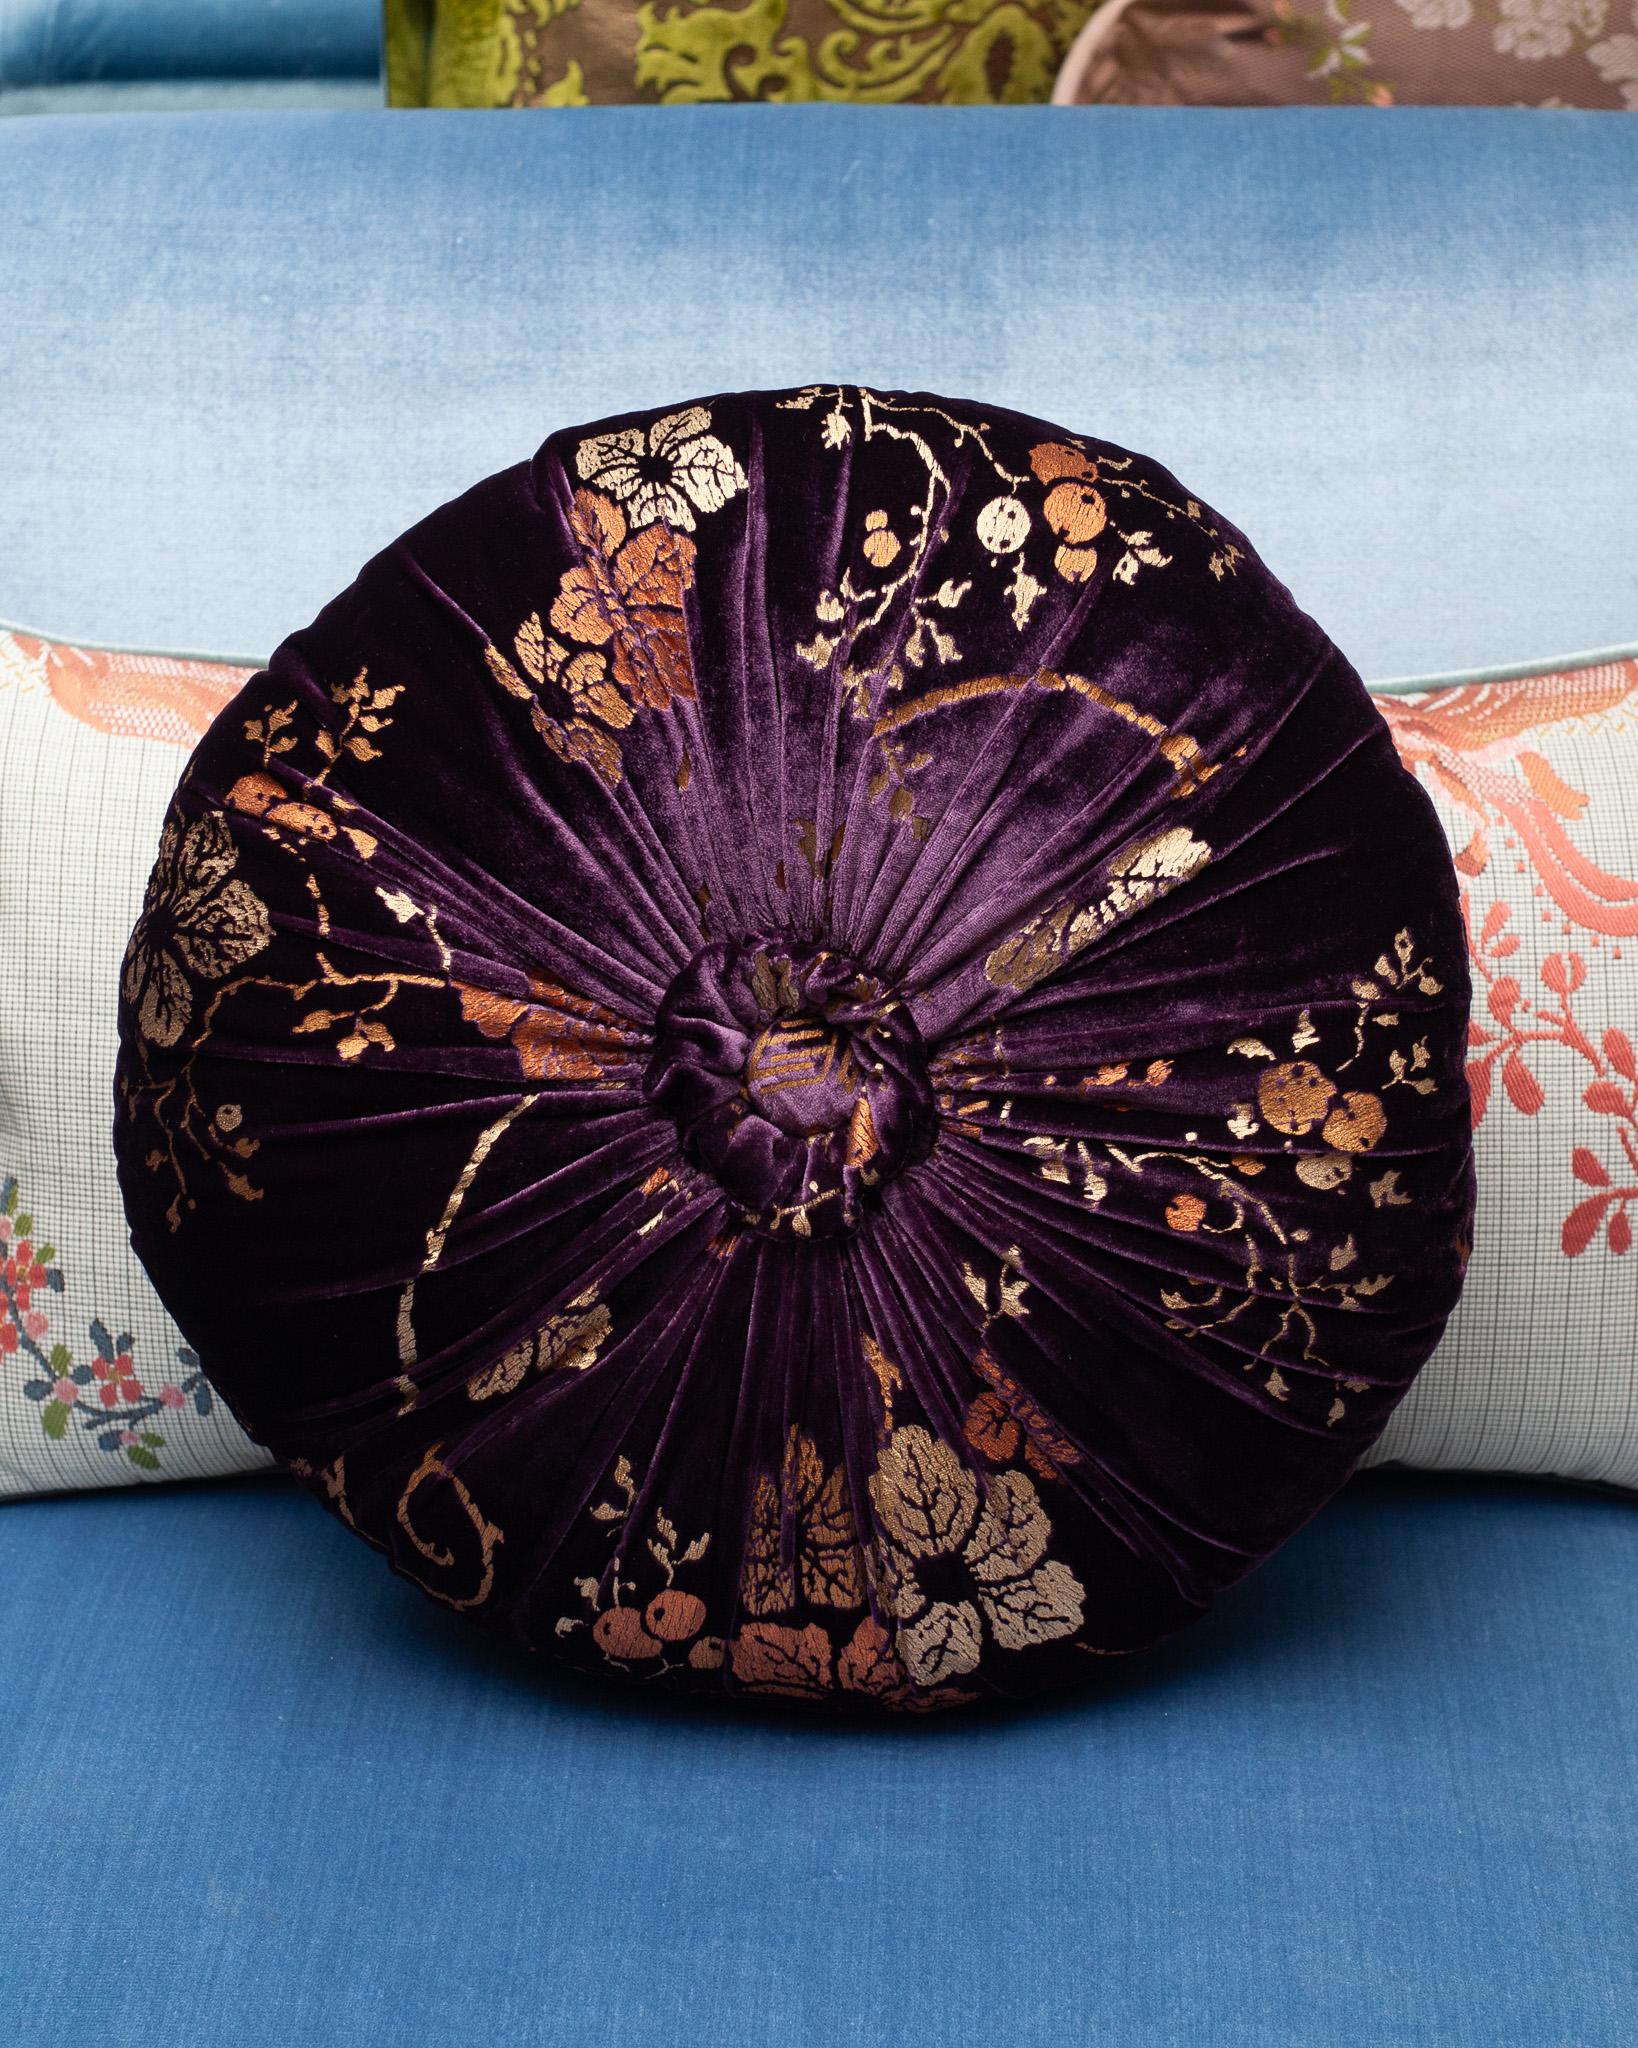 A beautiful Fortuny / Venetia Stadium round pillow with pleats and a center tuft in deep purple velvet with gold, made in Venice.

Mario Fortuny was born in 1871 in Granada Spain and after a childhood marked by the premature death of his father he